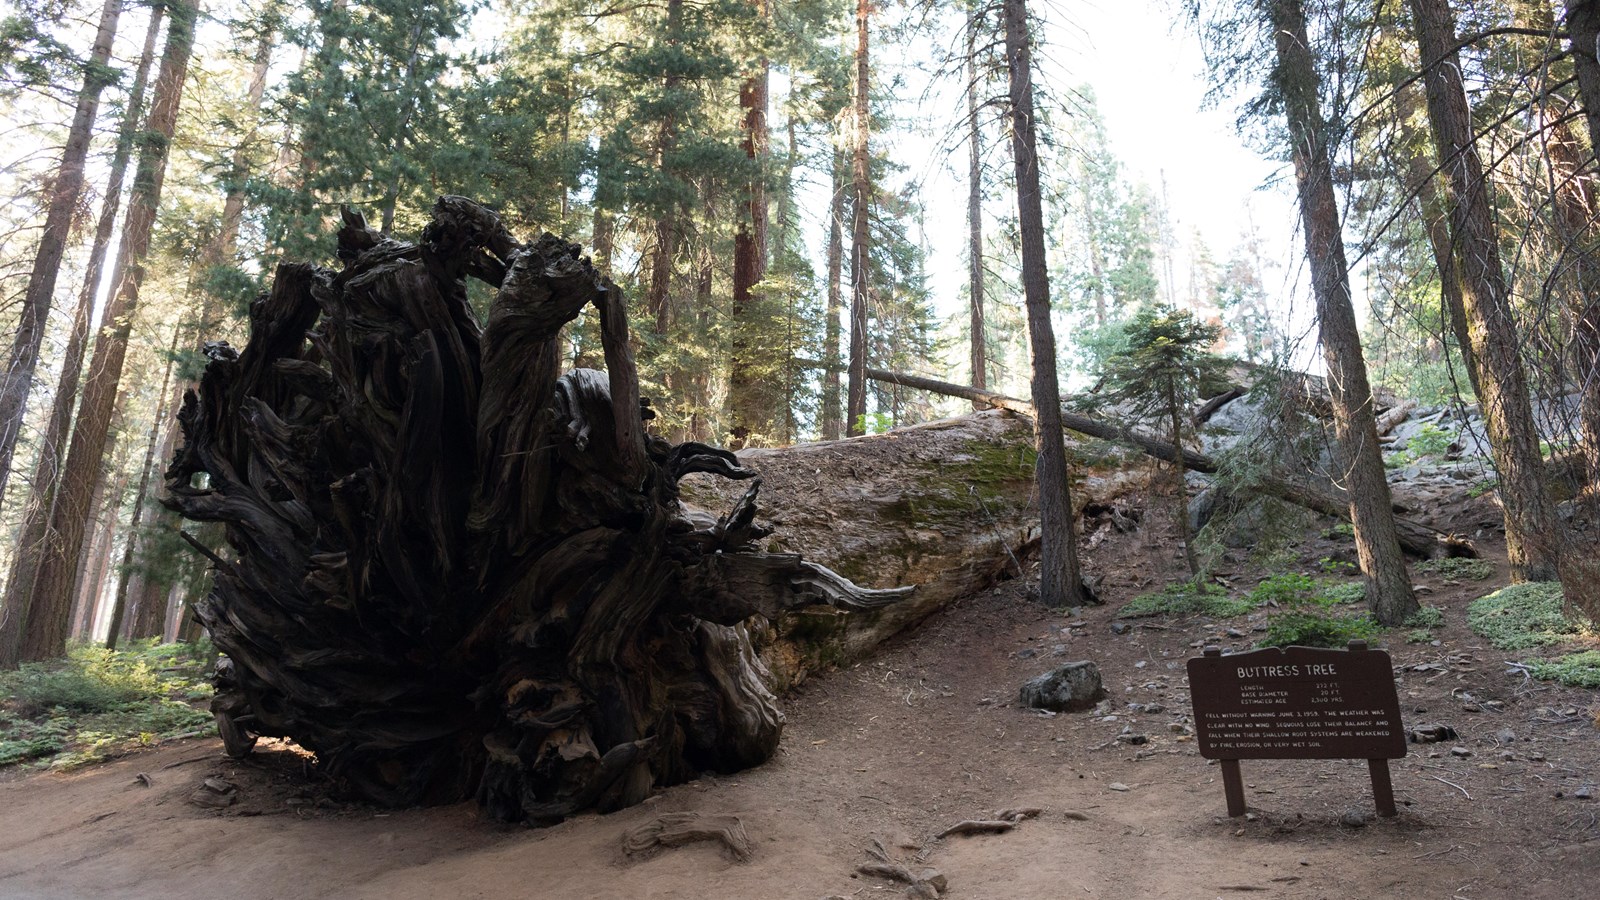 A fallen Sequoia tree with twisted roots lays down among tall trees